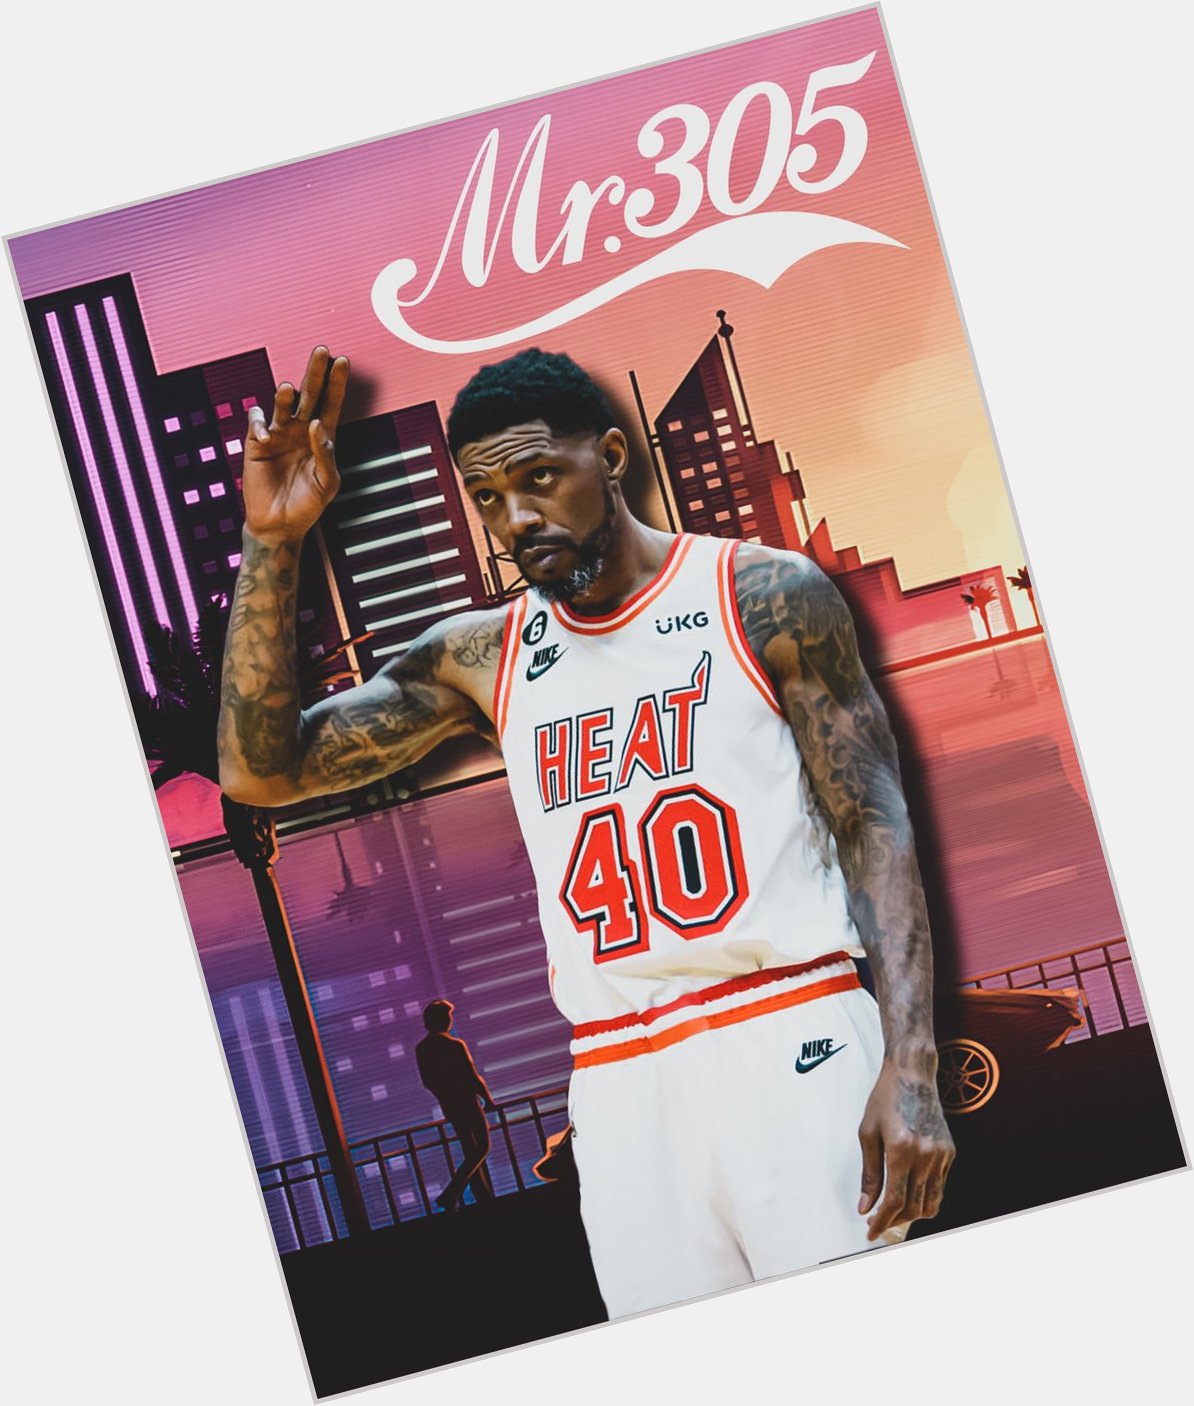 Happy Birthday to Udonis Haslem! 

43 years strong for OG    